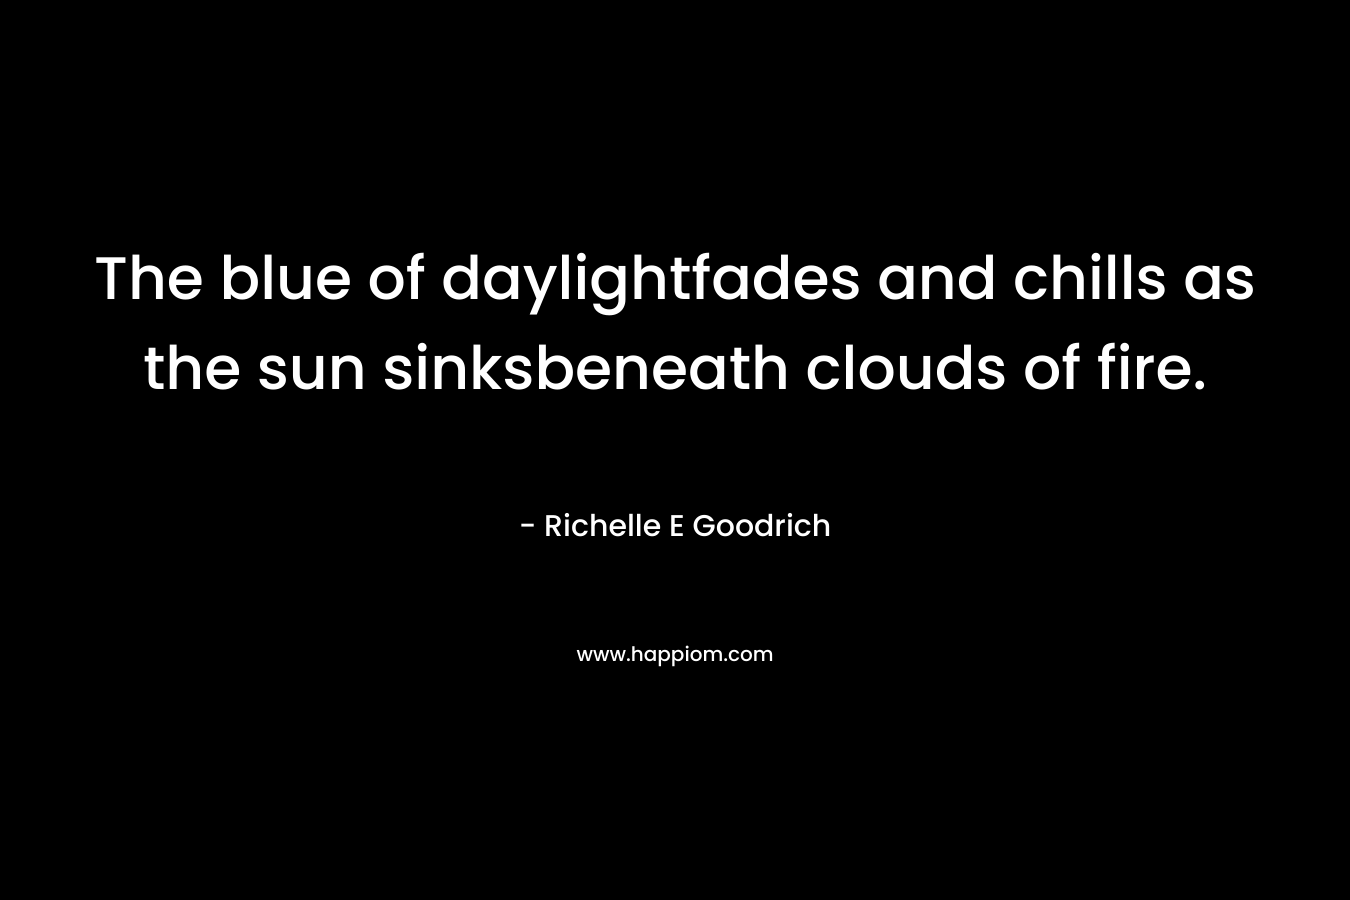 The blue of daylightfades and chills as the sun sinksbeneath clouds of fire. – Richelle E Goodrich